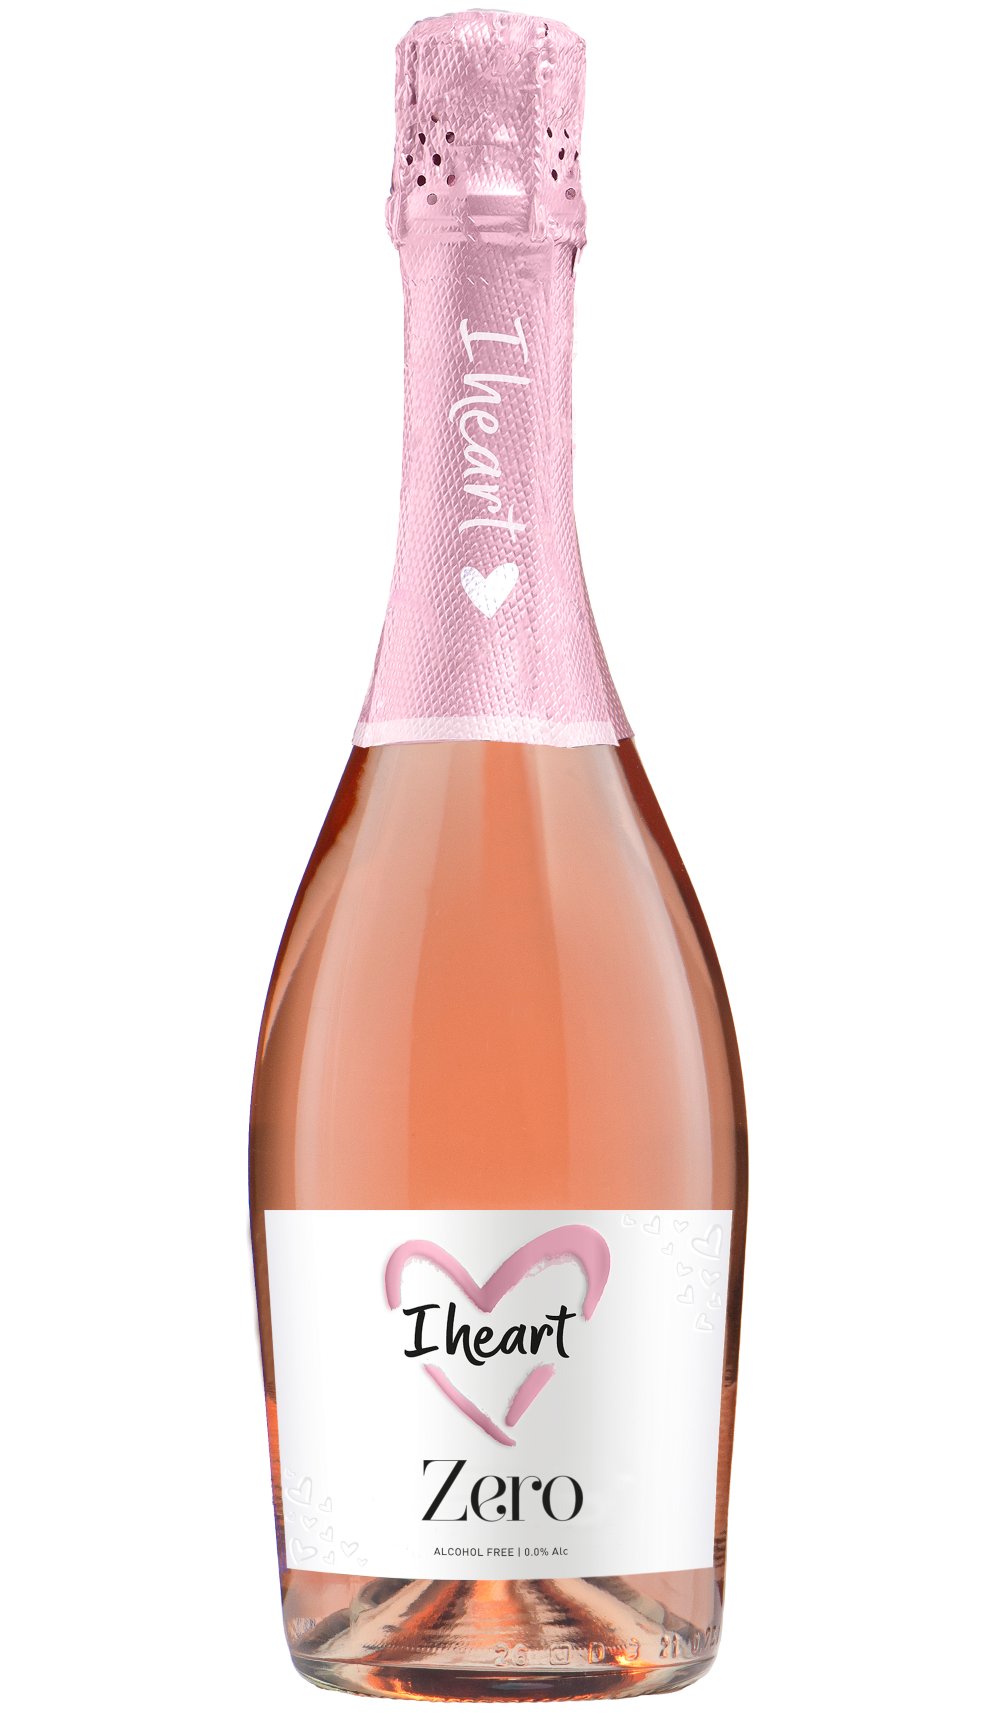 heart wines Our I wines -